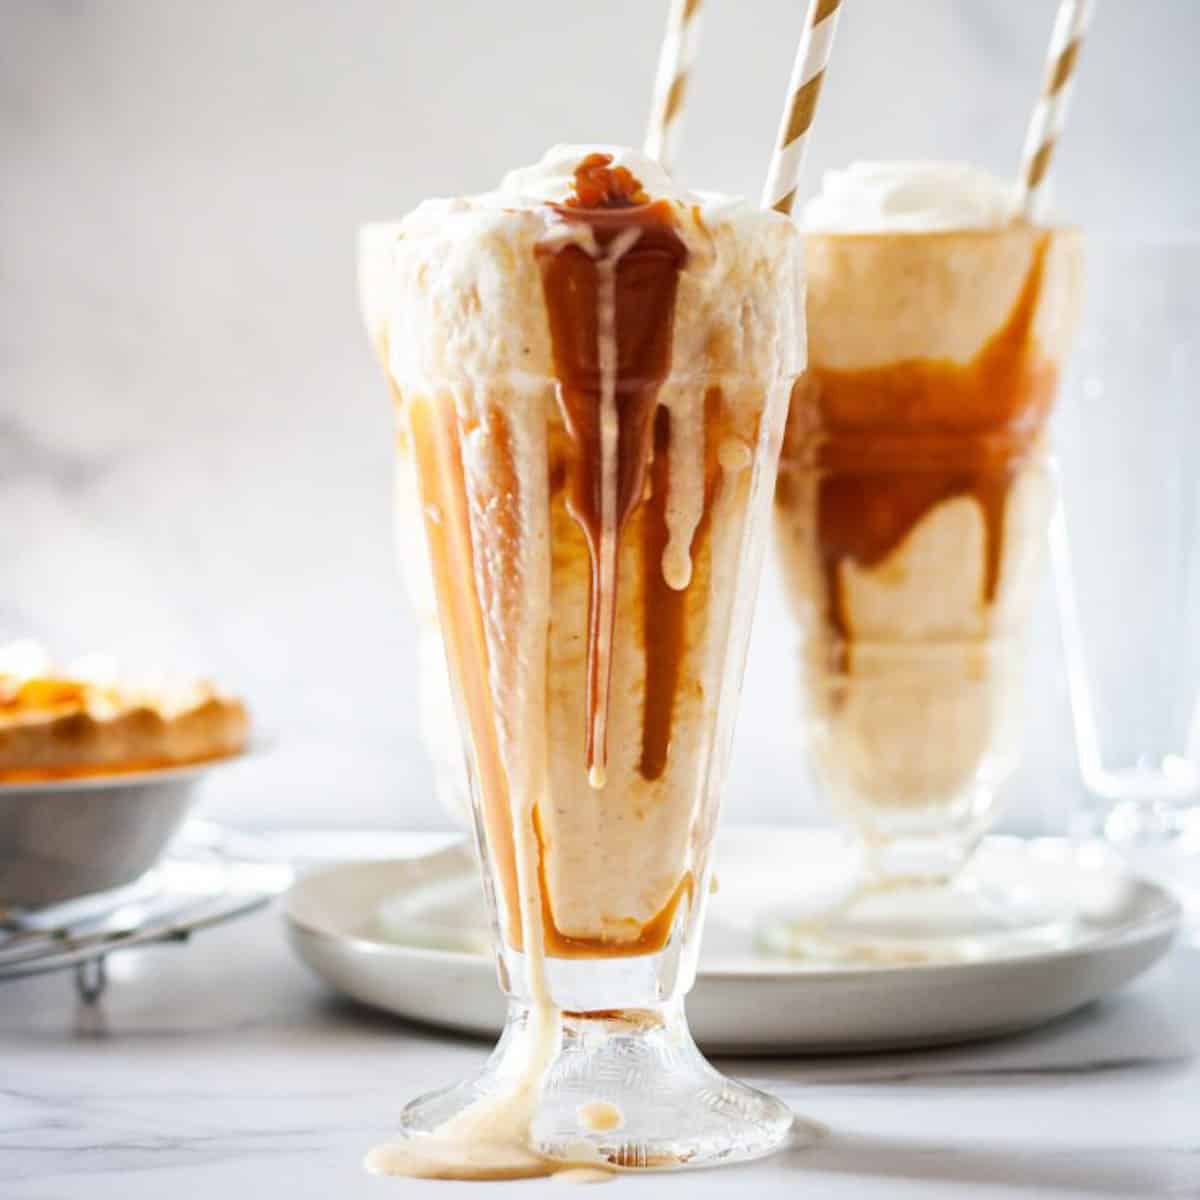 A pumpkin share recipe with leftover pumpkin pie is the perfect milkshake.